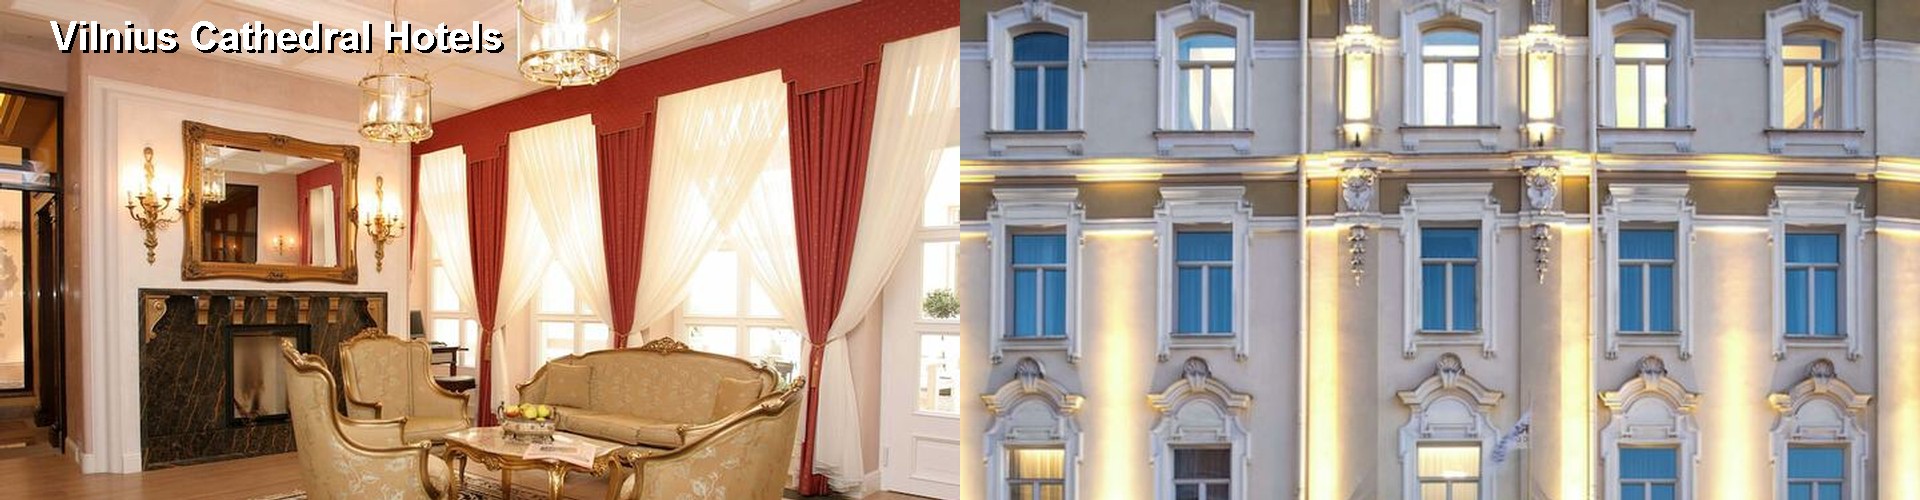 5 Best Hotels near Vilnius Cathedral